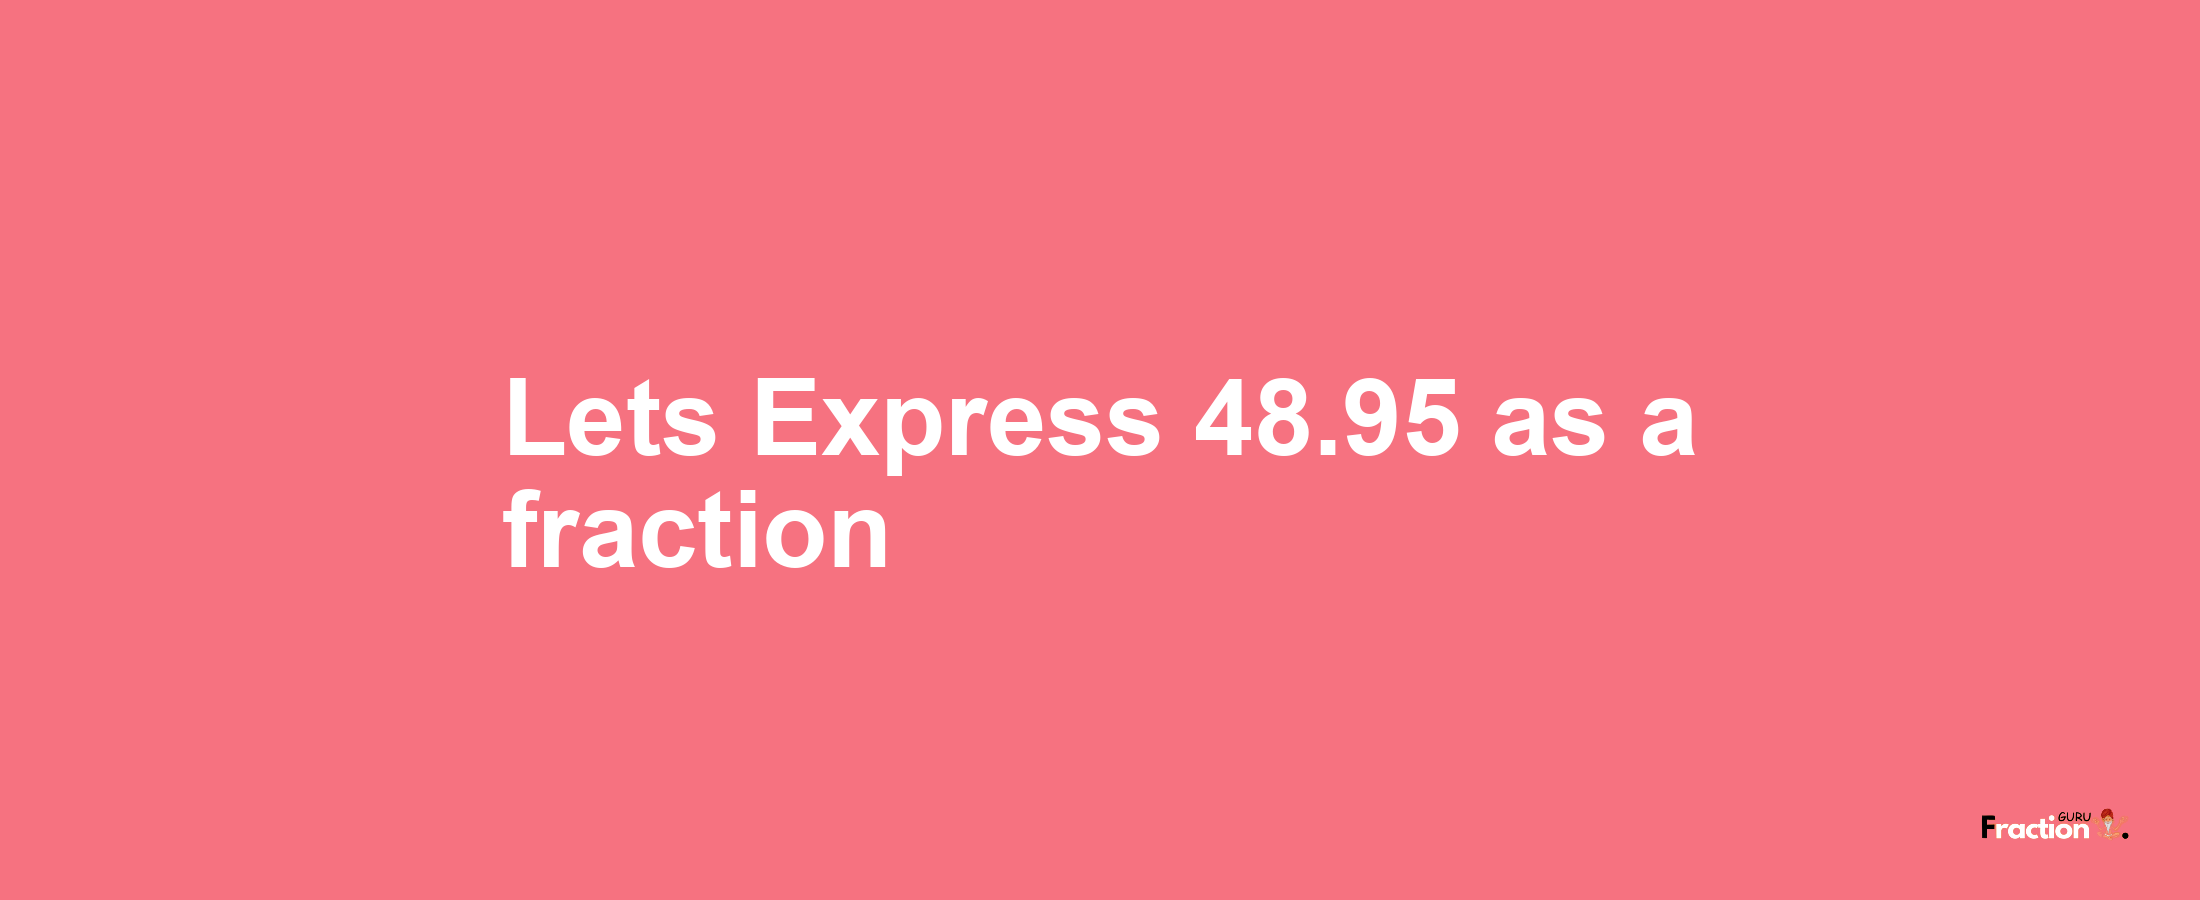 Lets Express 48.95 as afraction